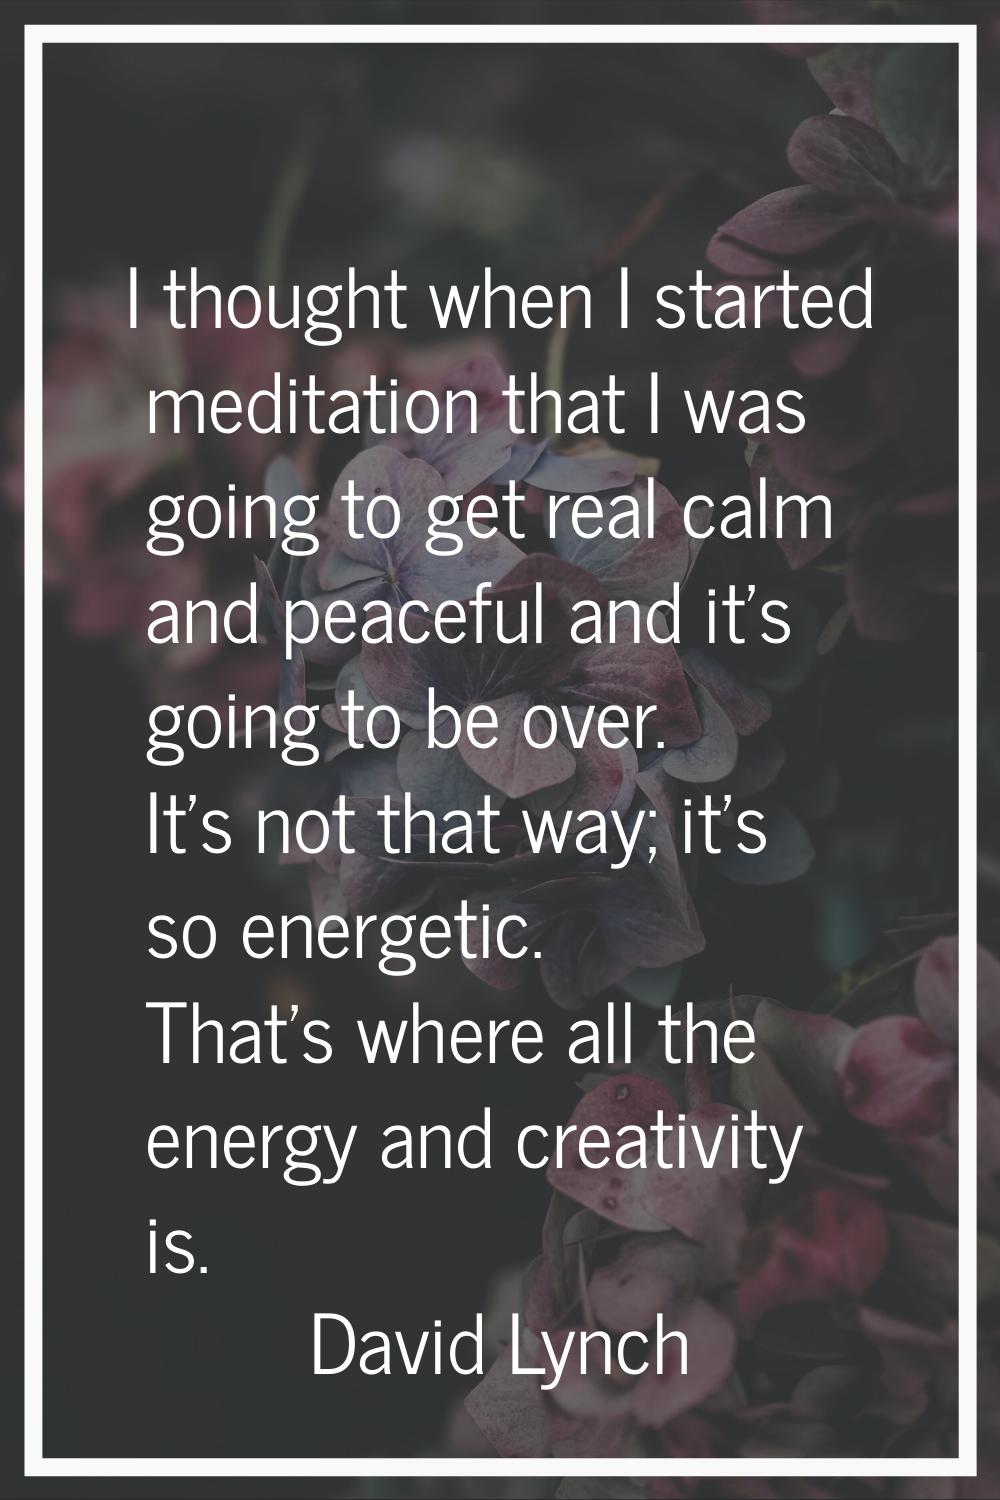 I thought when I started meditation that I was going to get real calm and peaceful and it's going t